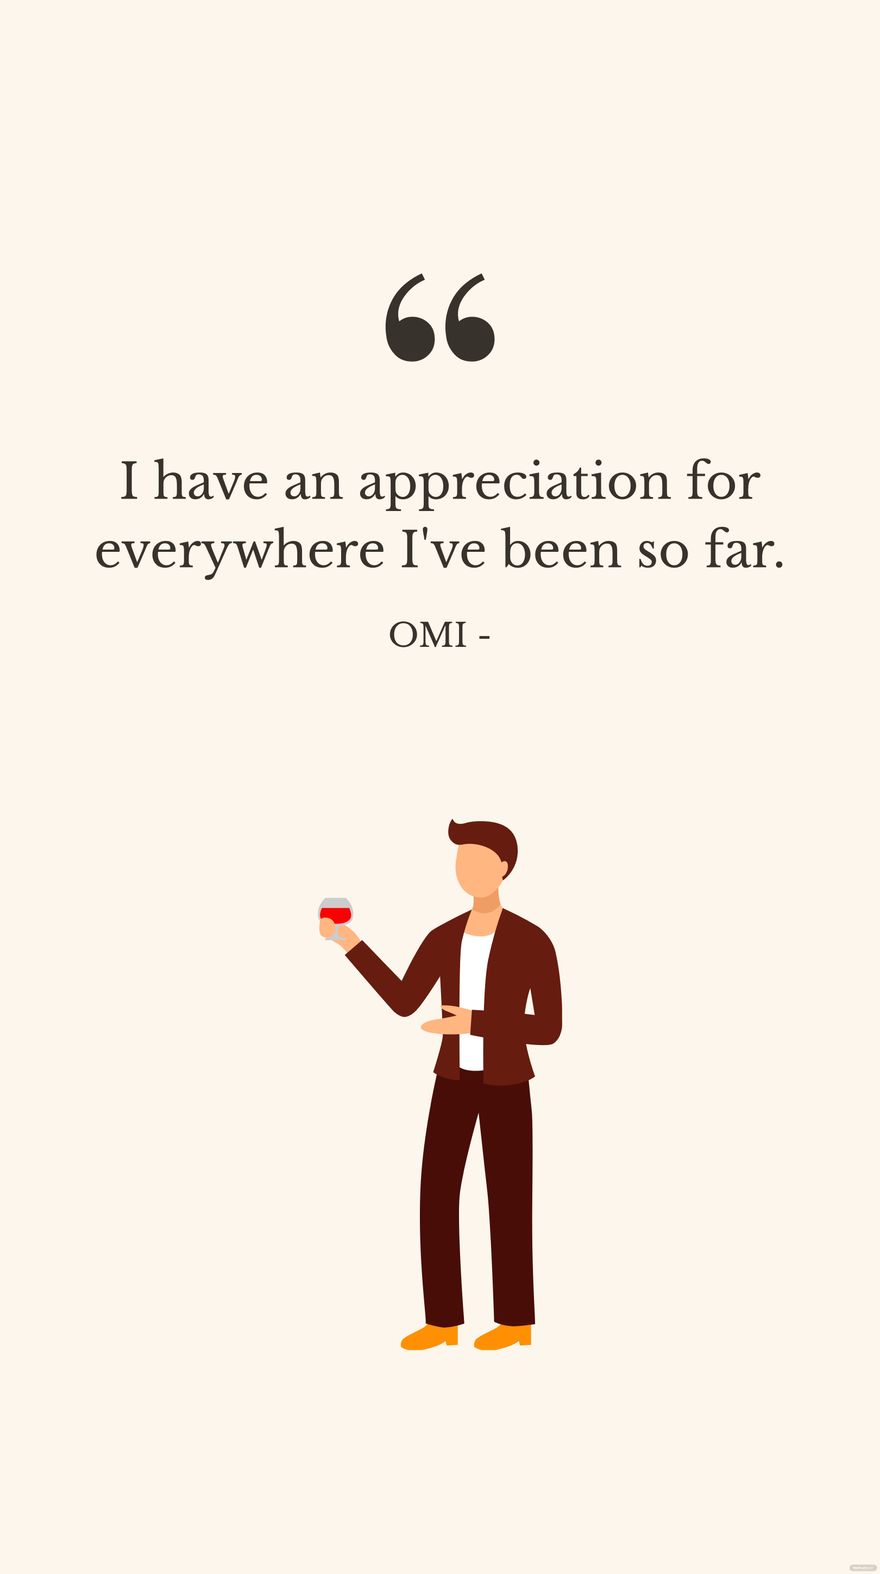 OMI - I have an appreciation for everywhere I've been so far. in JPG